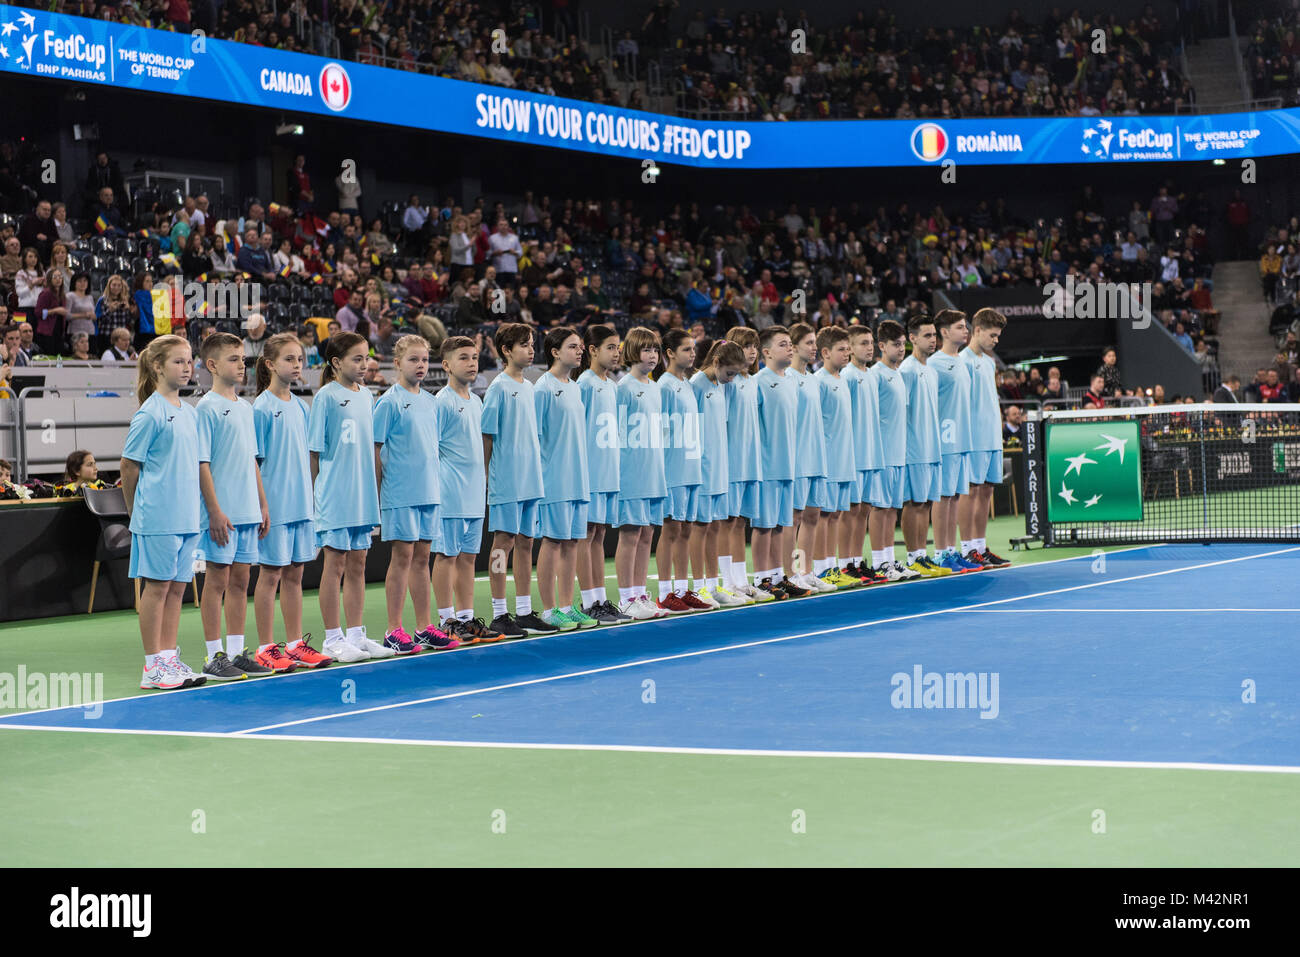 CLUJ NAPOCA, ROMANIA - FEBRUARY 10, 2018: The ball boys and girls entering the court during the opening ceremony of the Fed Cup World Group Play-Offs  Stock Photo